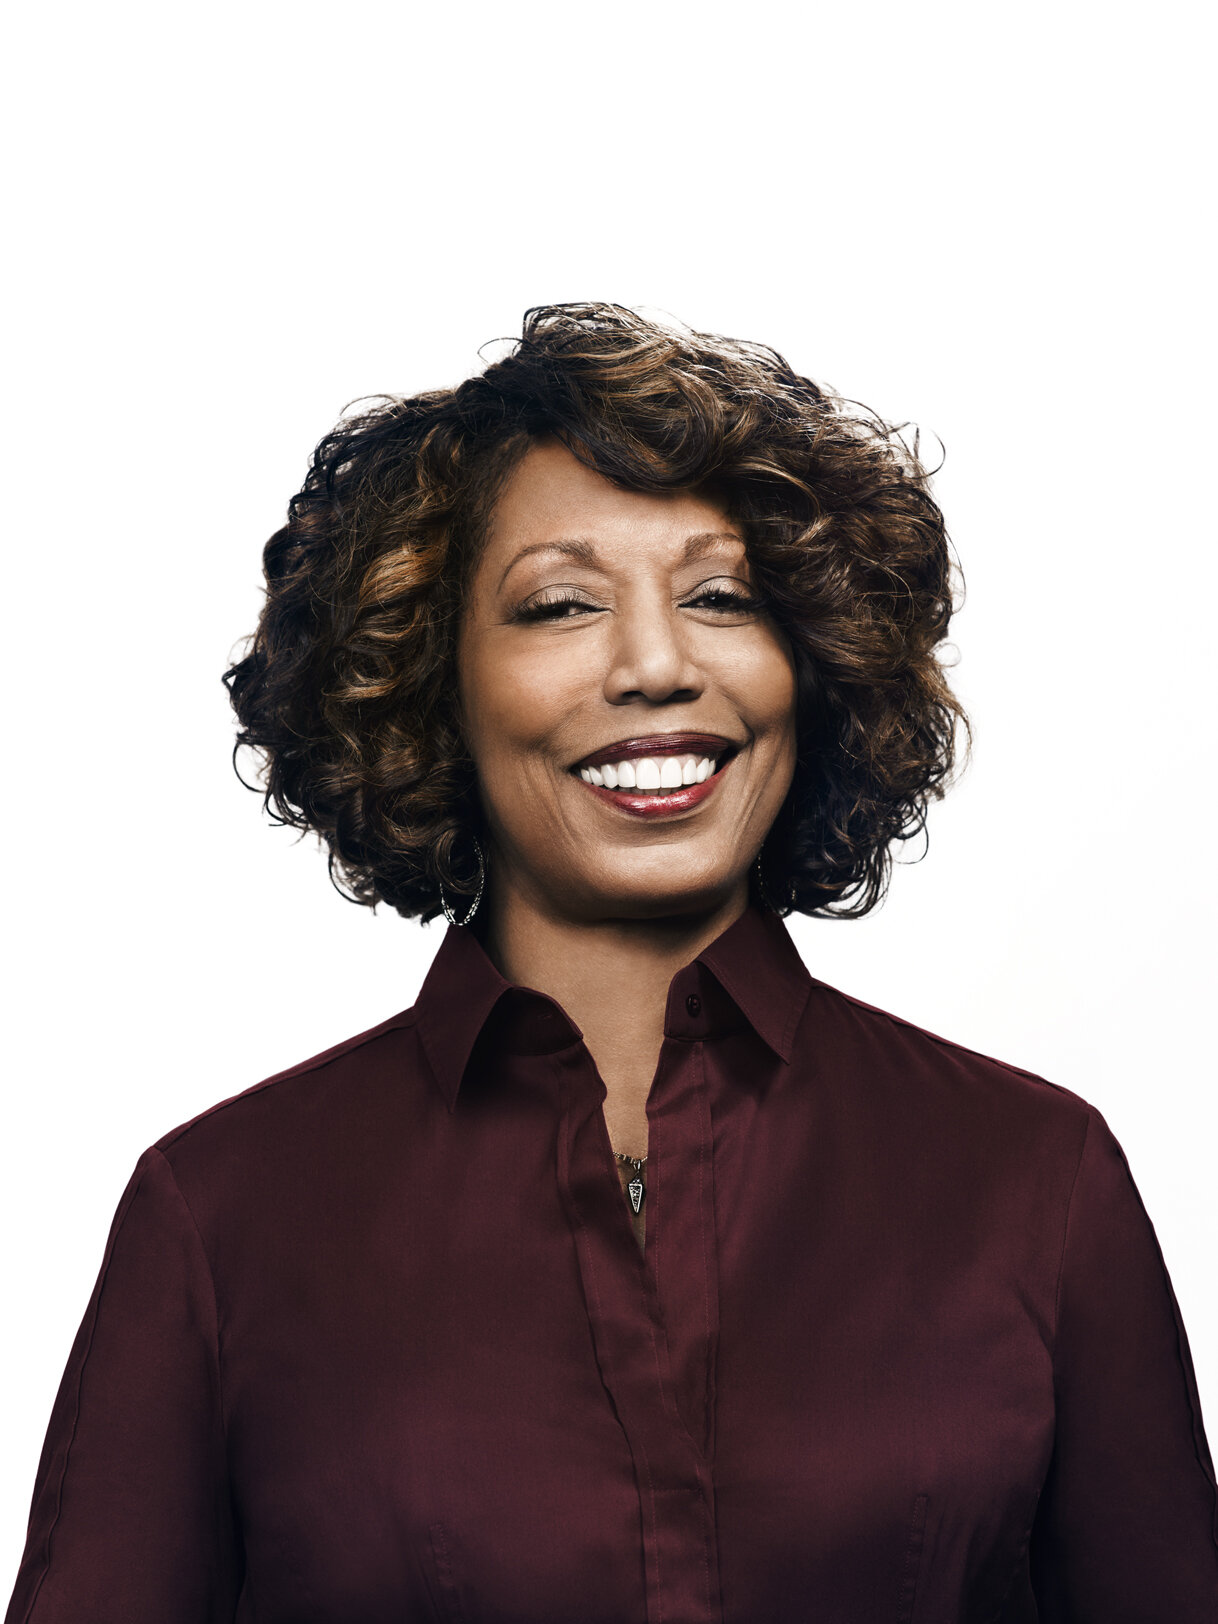 DENISE YOUNG SMITH, CORNELL TECH